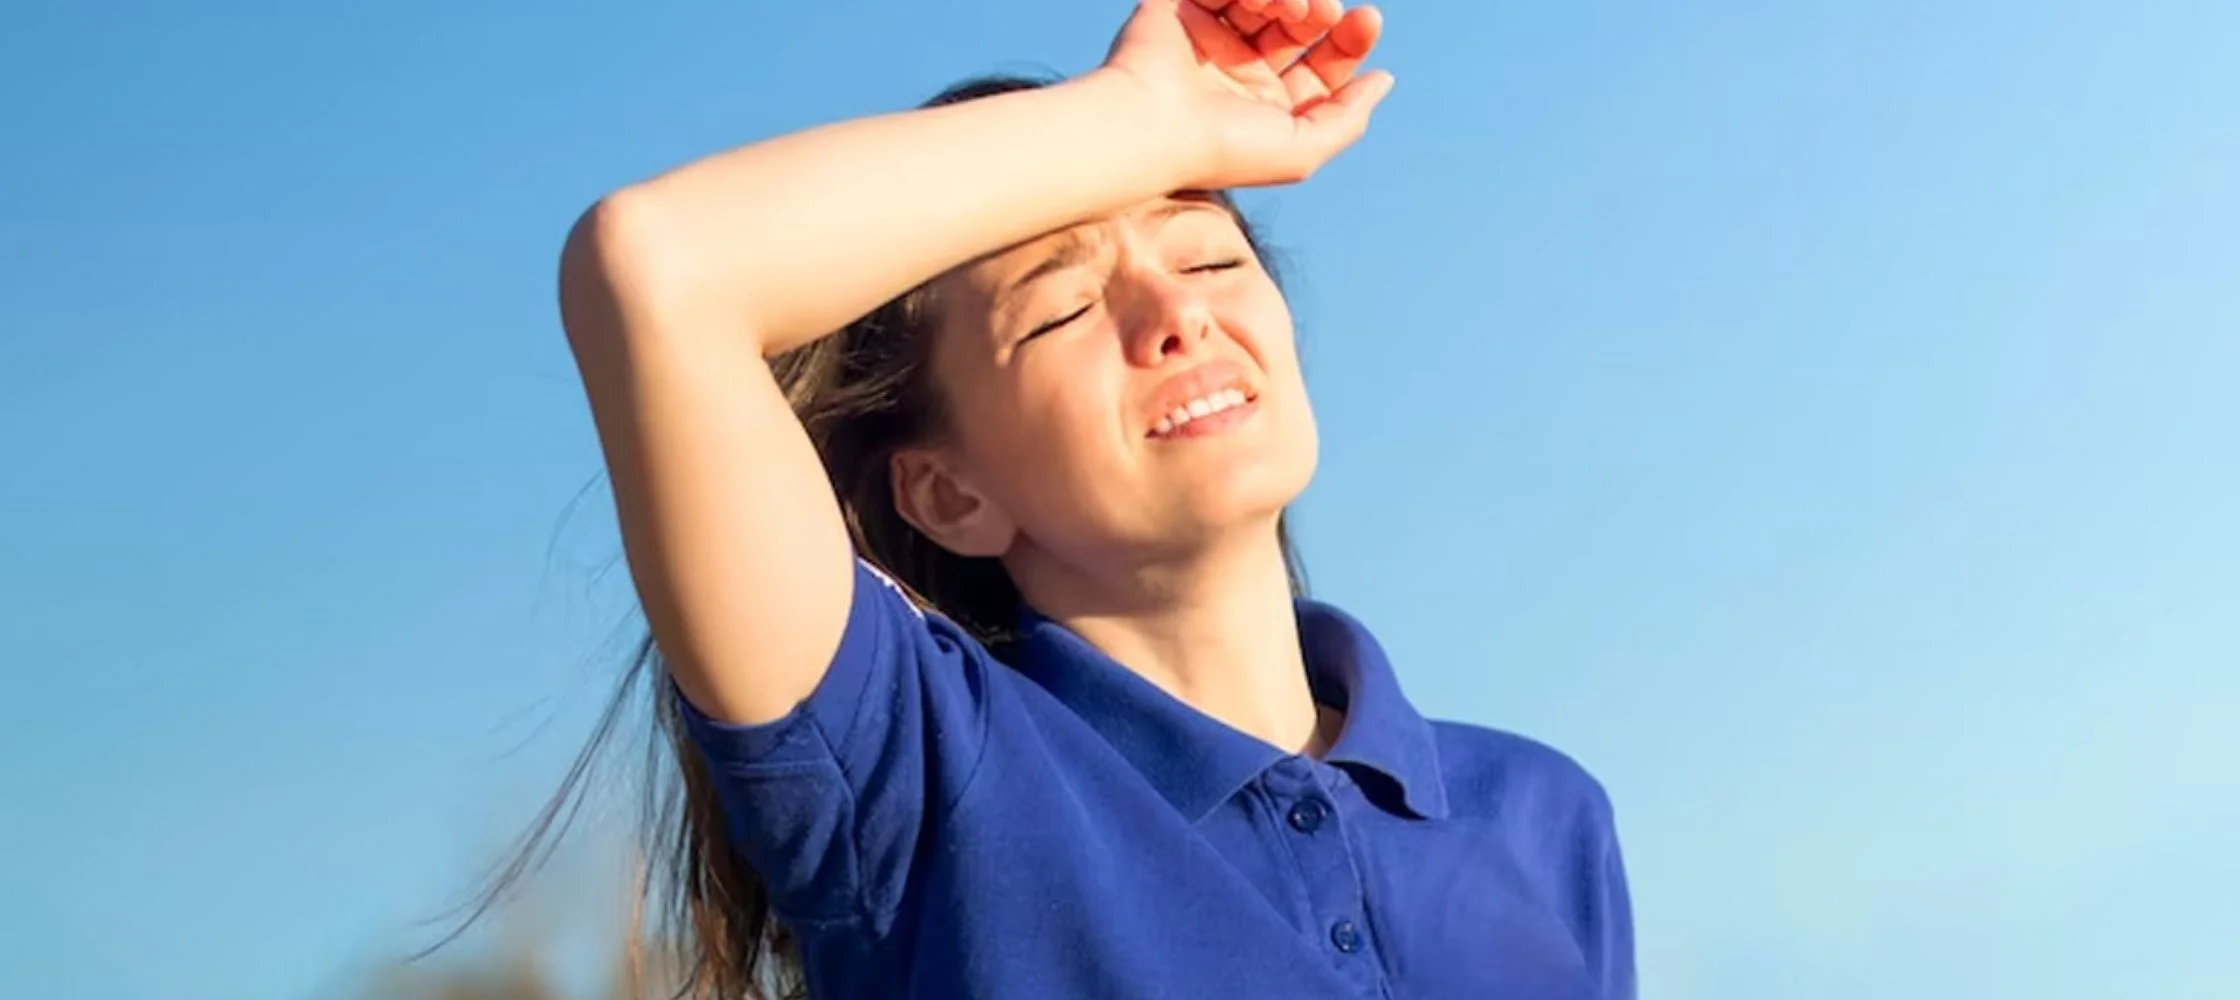 heat-conditions-and-heat-stroke:-protecting-yourself-in-hot-weather